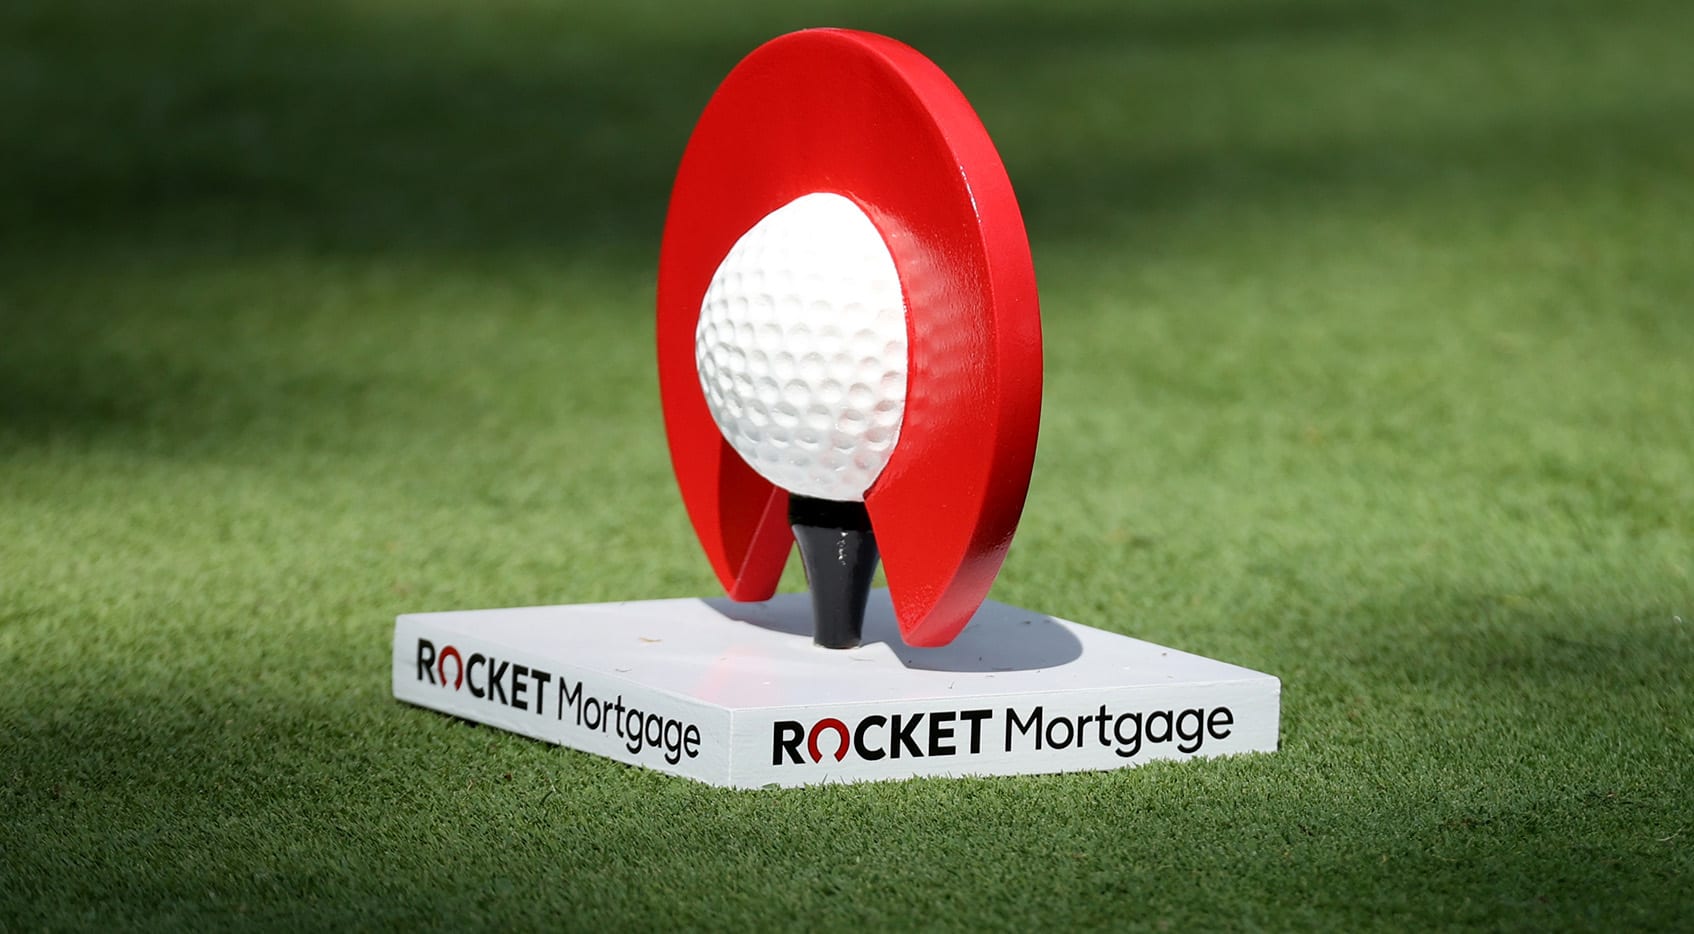 How to Watch the Rocket Mortgage Classic, Round 1 Featured Groups, live scores, tee times, TV times